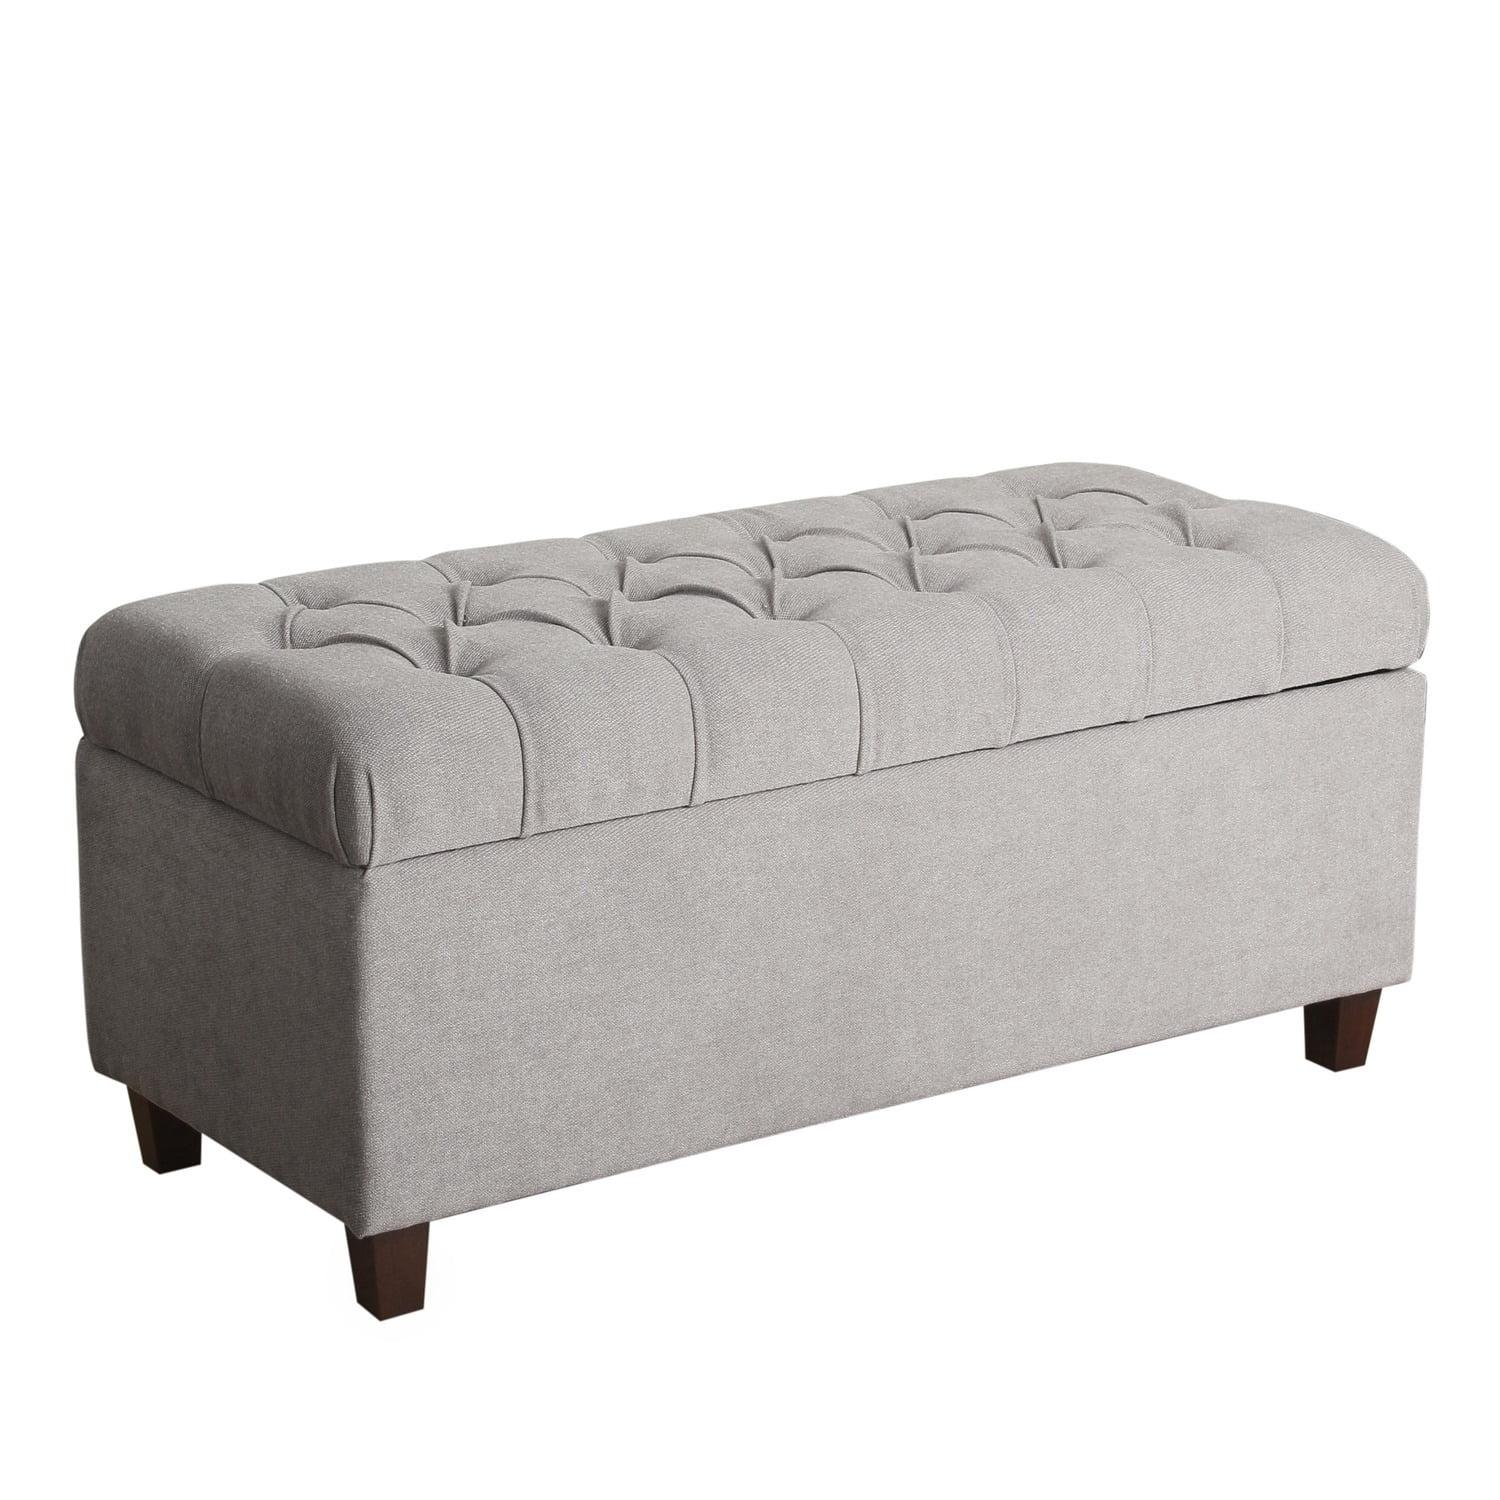 Contemporary Light Gray Tufted Bench with Walnut Brown Storage